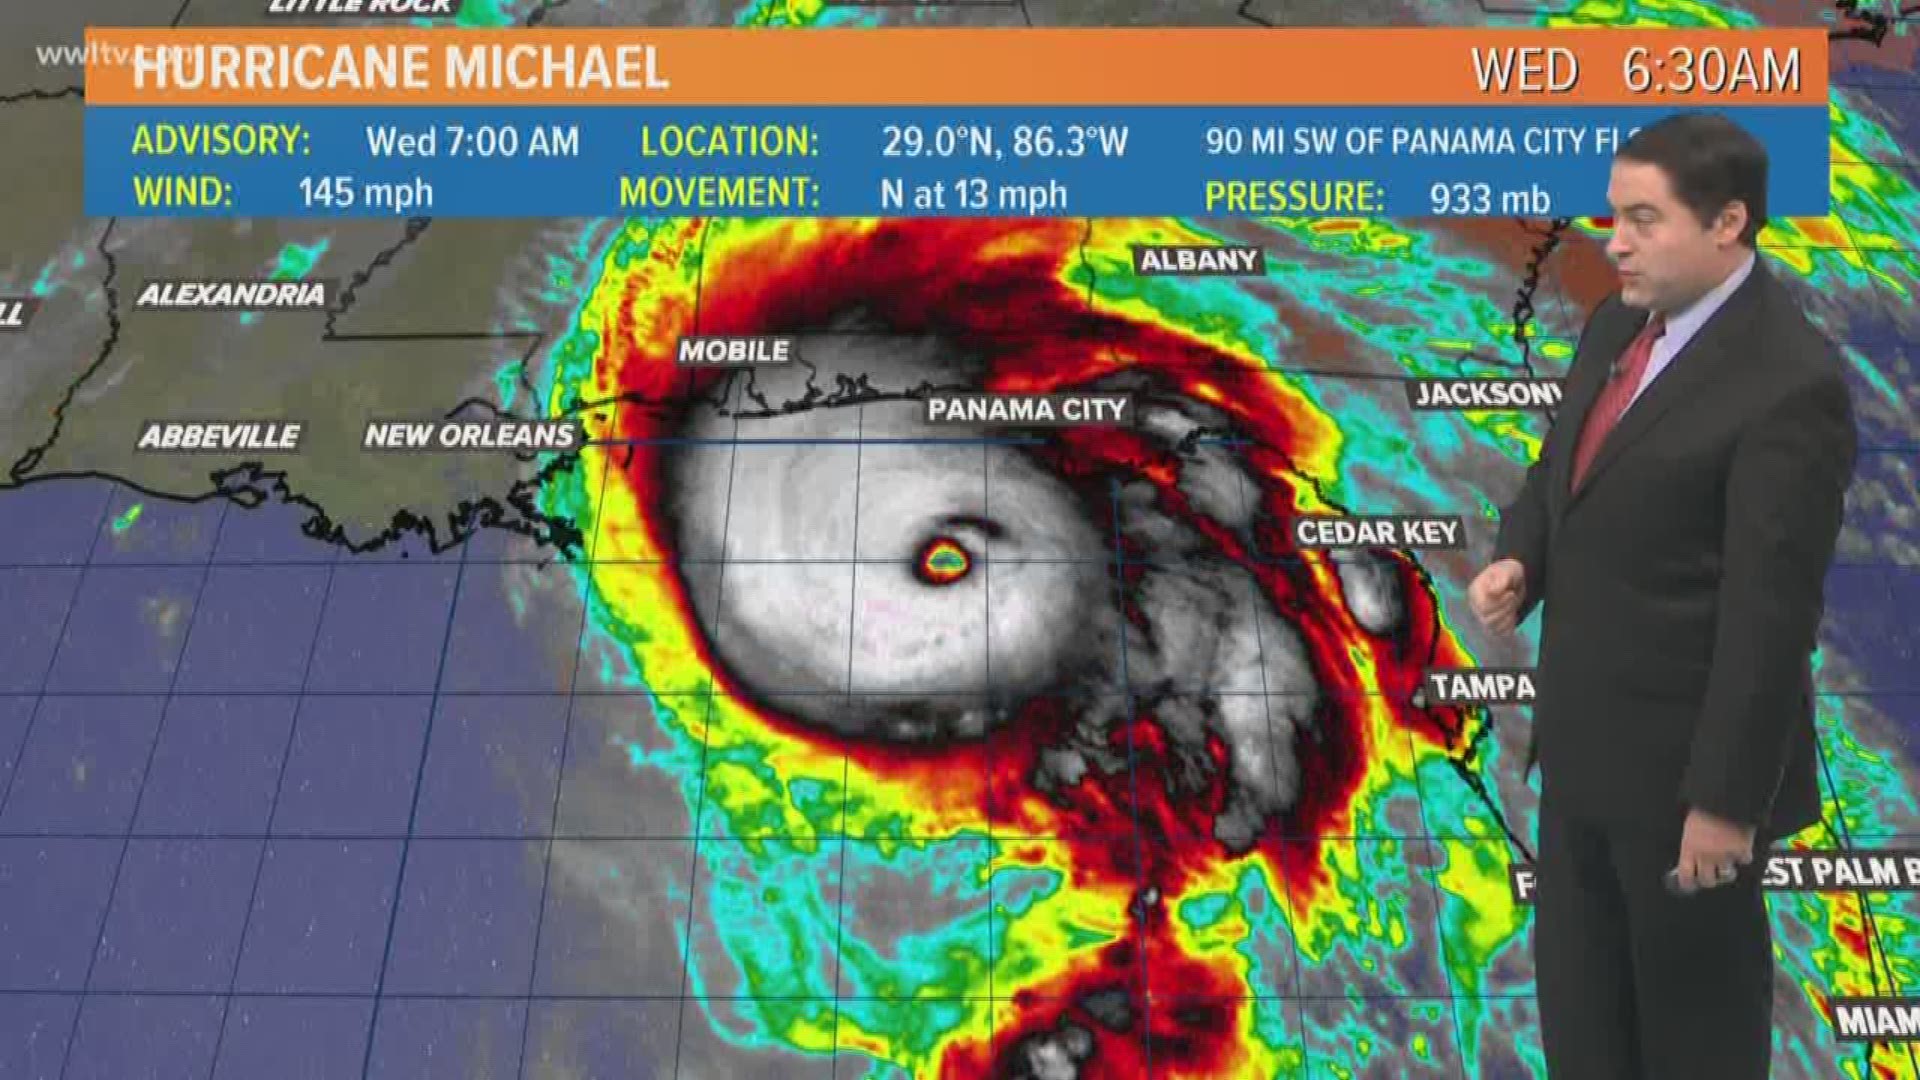 Hurricane Michael strengthened overnight to an extremely dangerous Category 4 hurricane as it moves toward the Florida Panhandle.